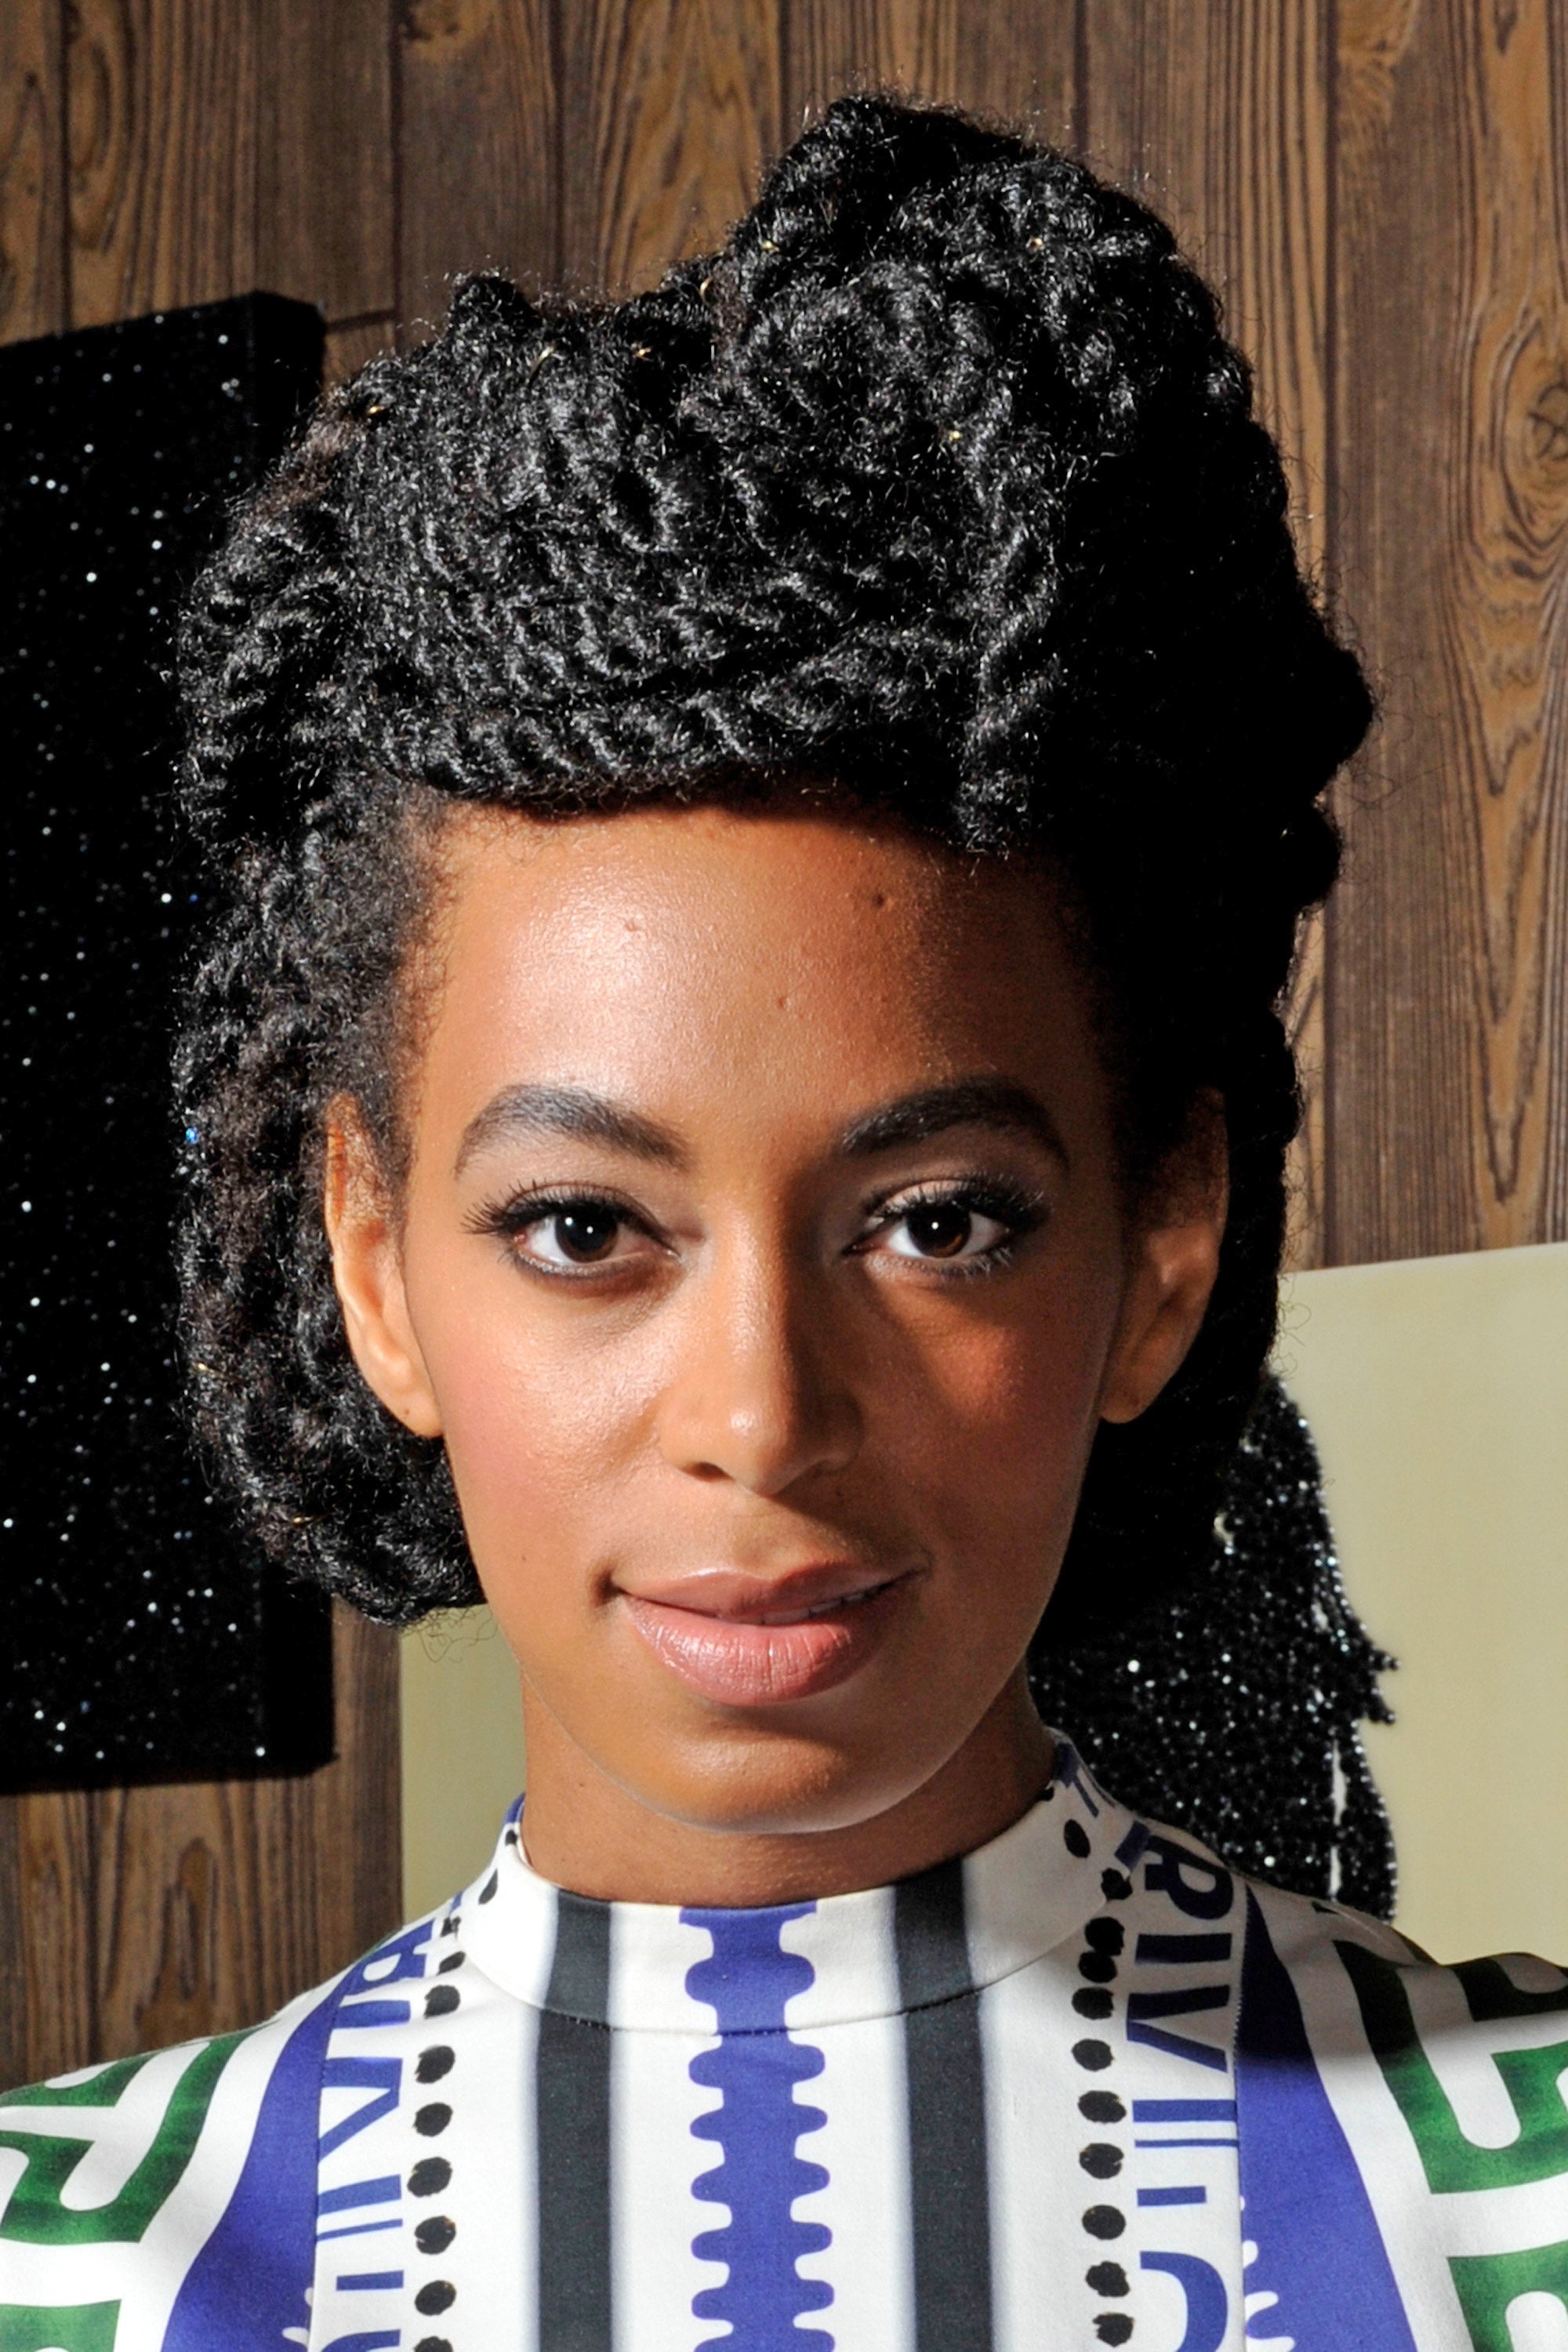 Solange’s Top 10 Hair Moments of 2013